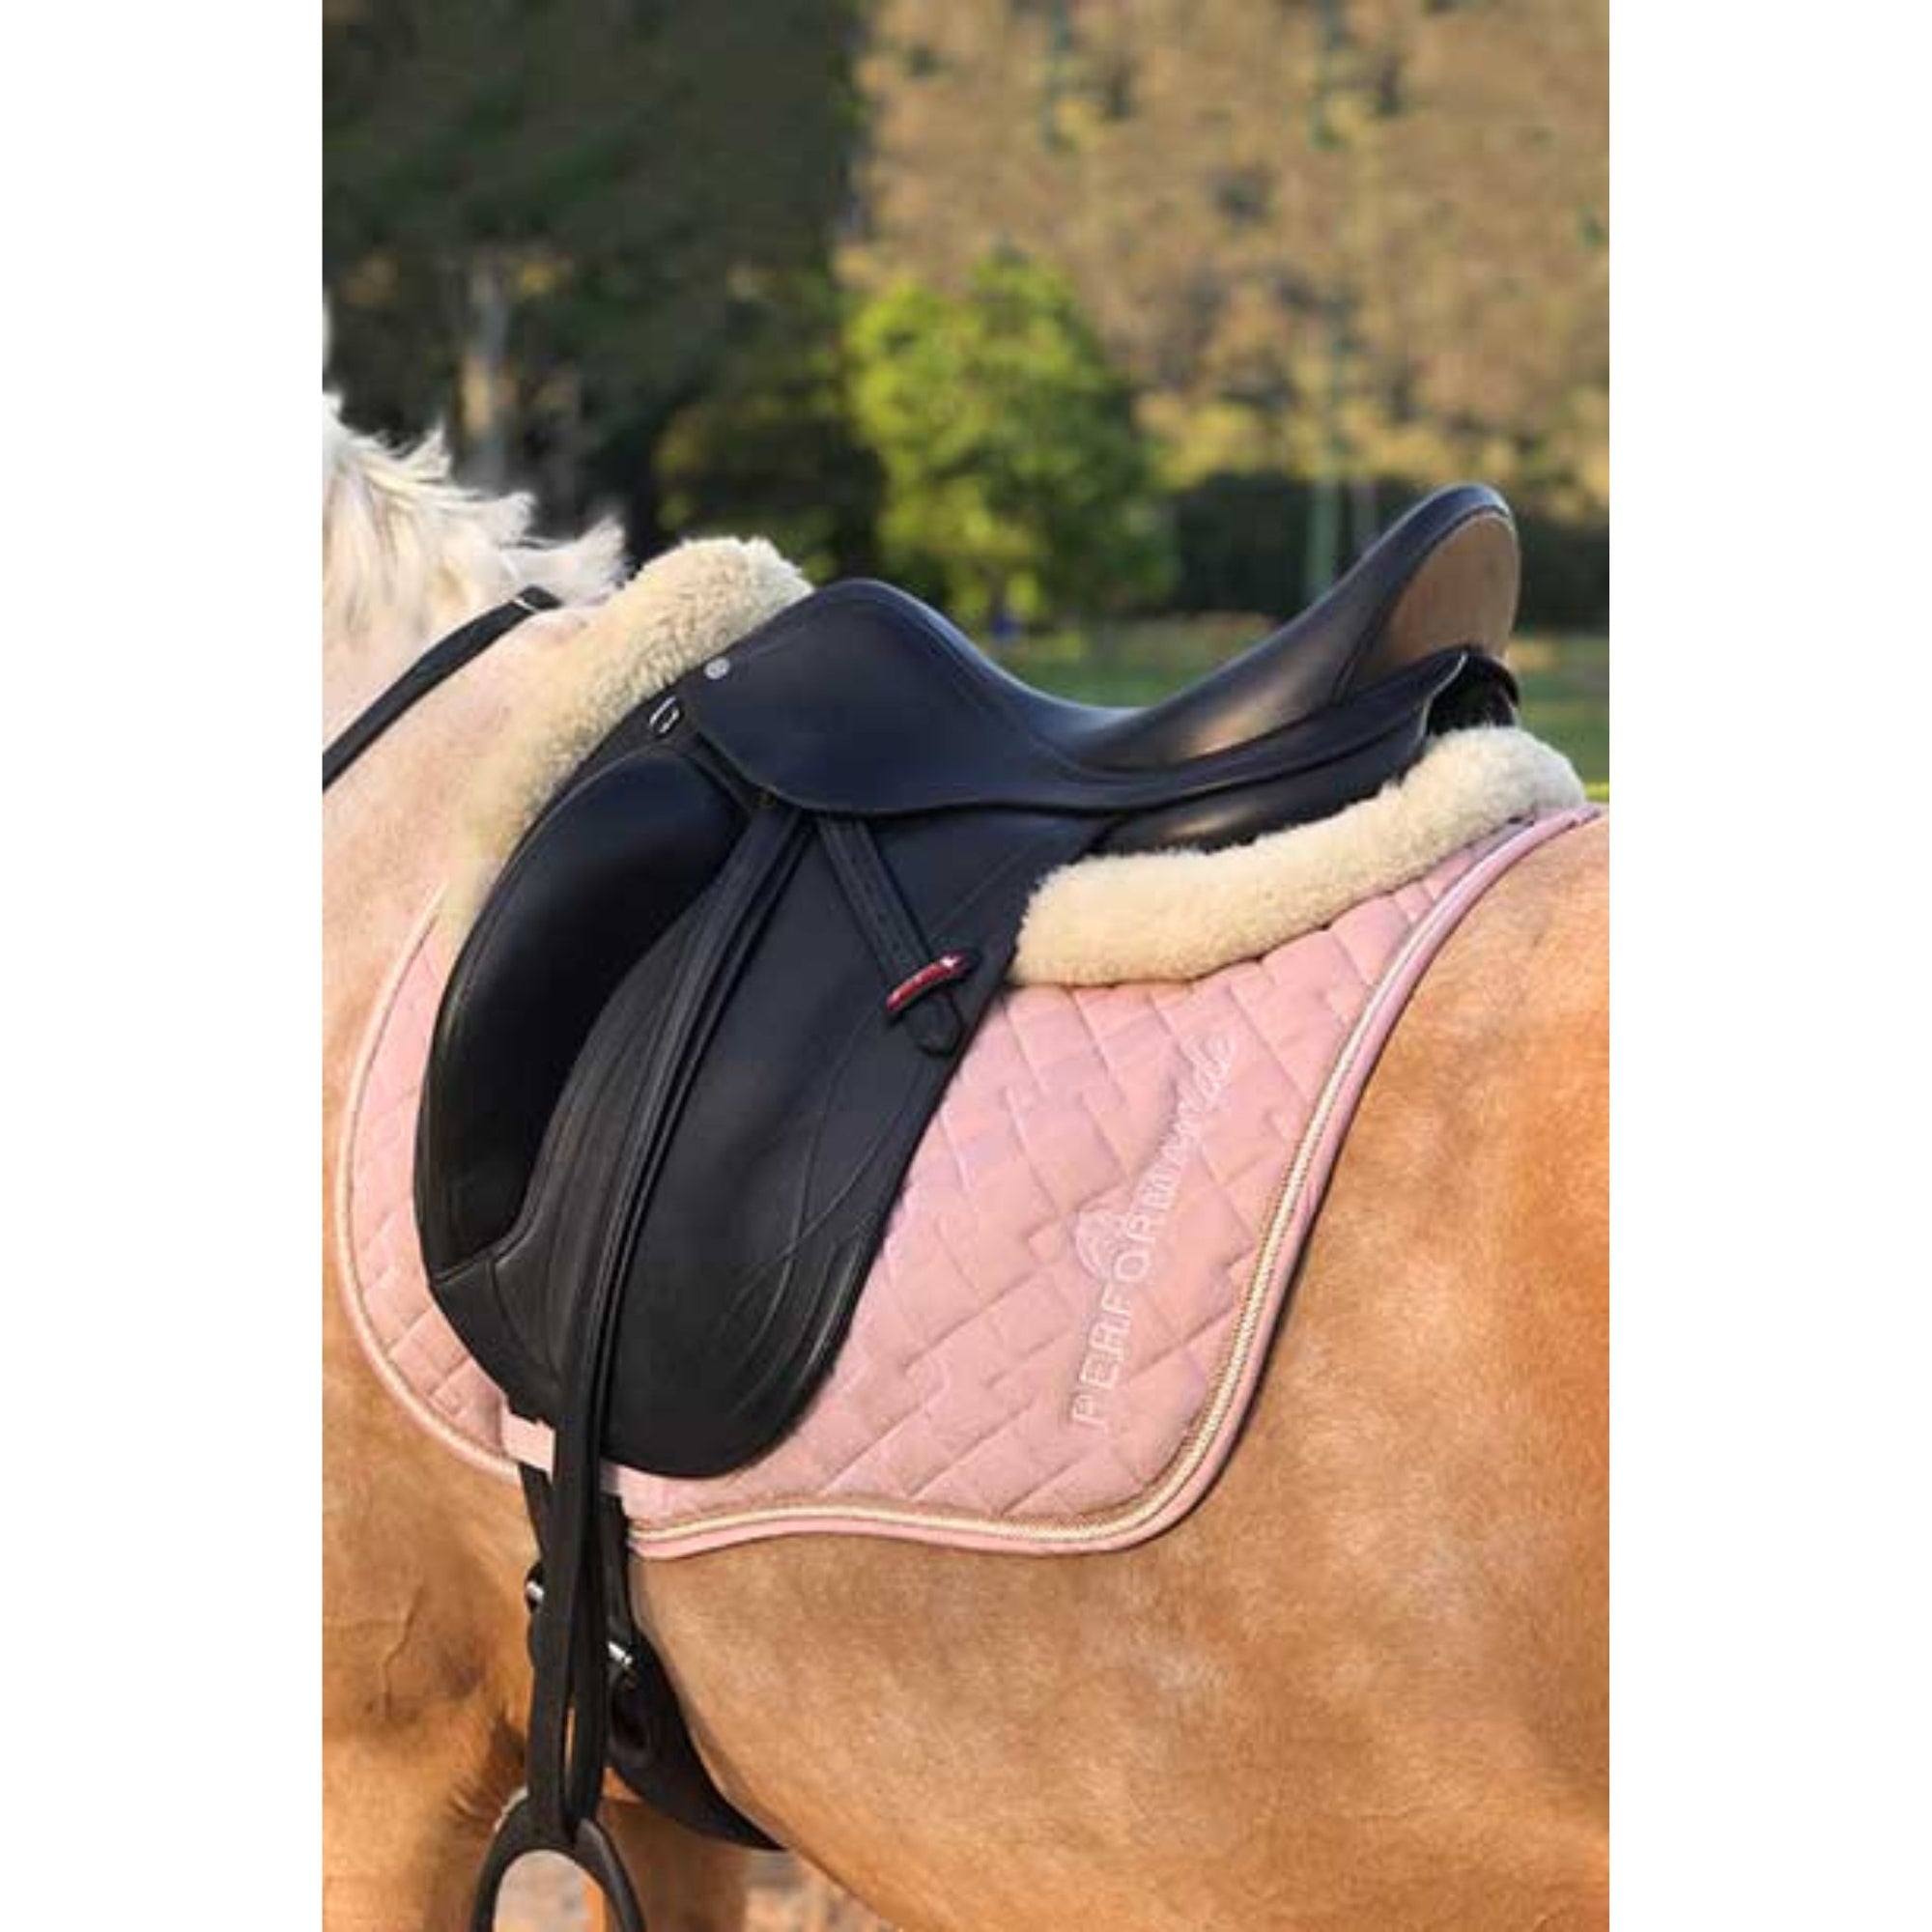 Bay horse wearing black saddle pad with silver glitter and white trim.